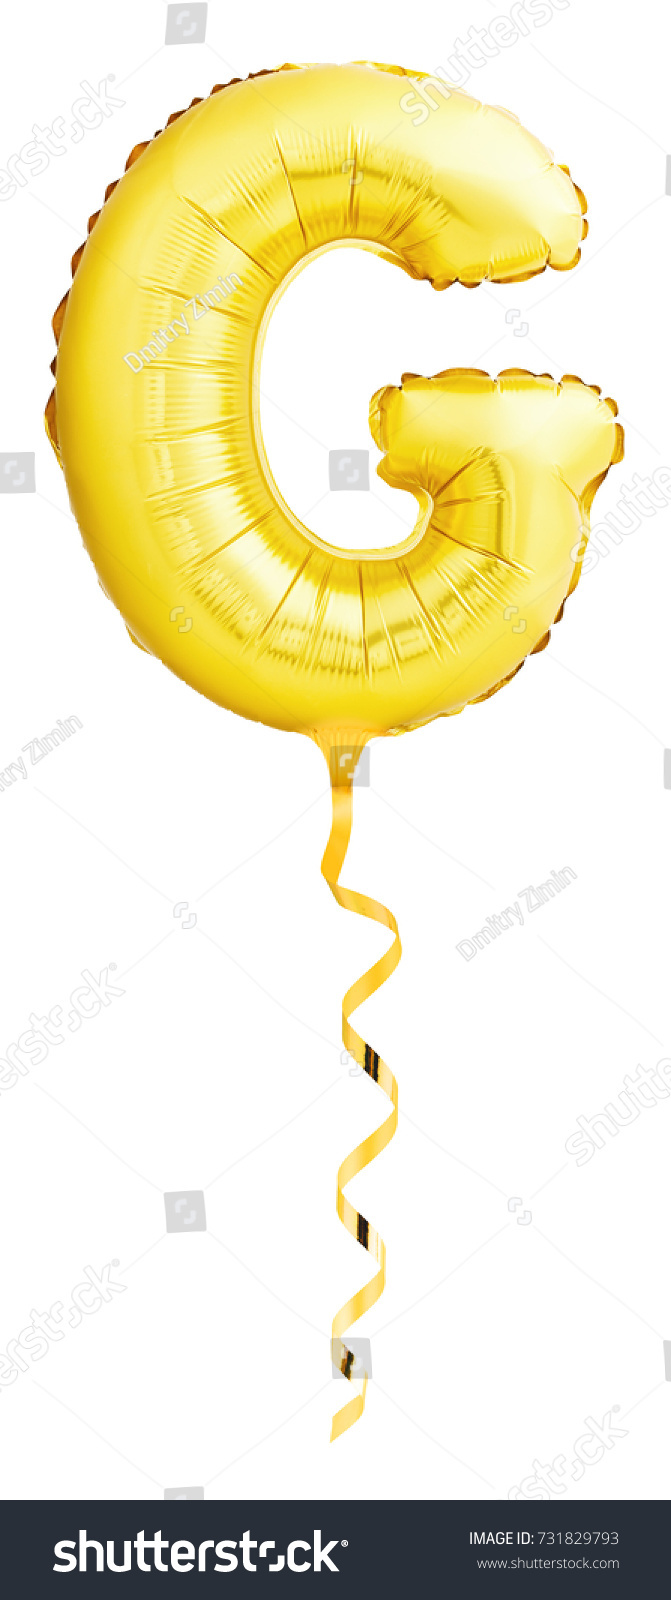 Golden letter G made of inflatable balloon with golden ribbon isolated on white background #731829793